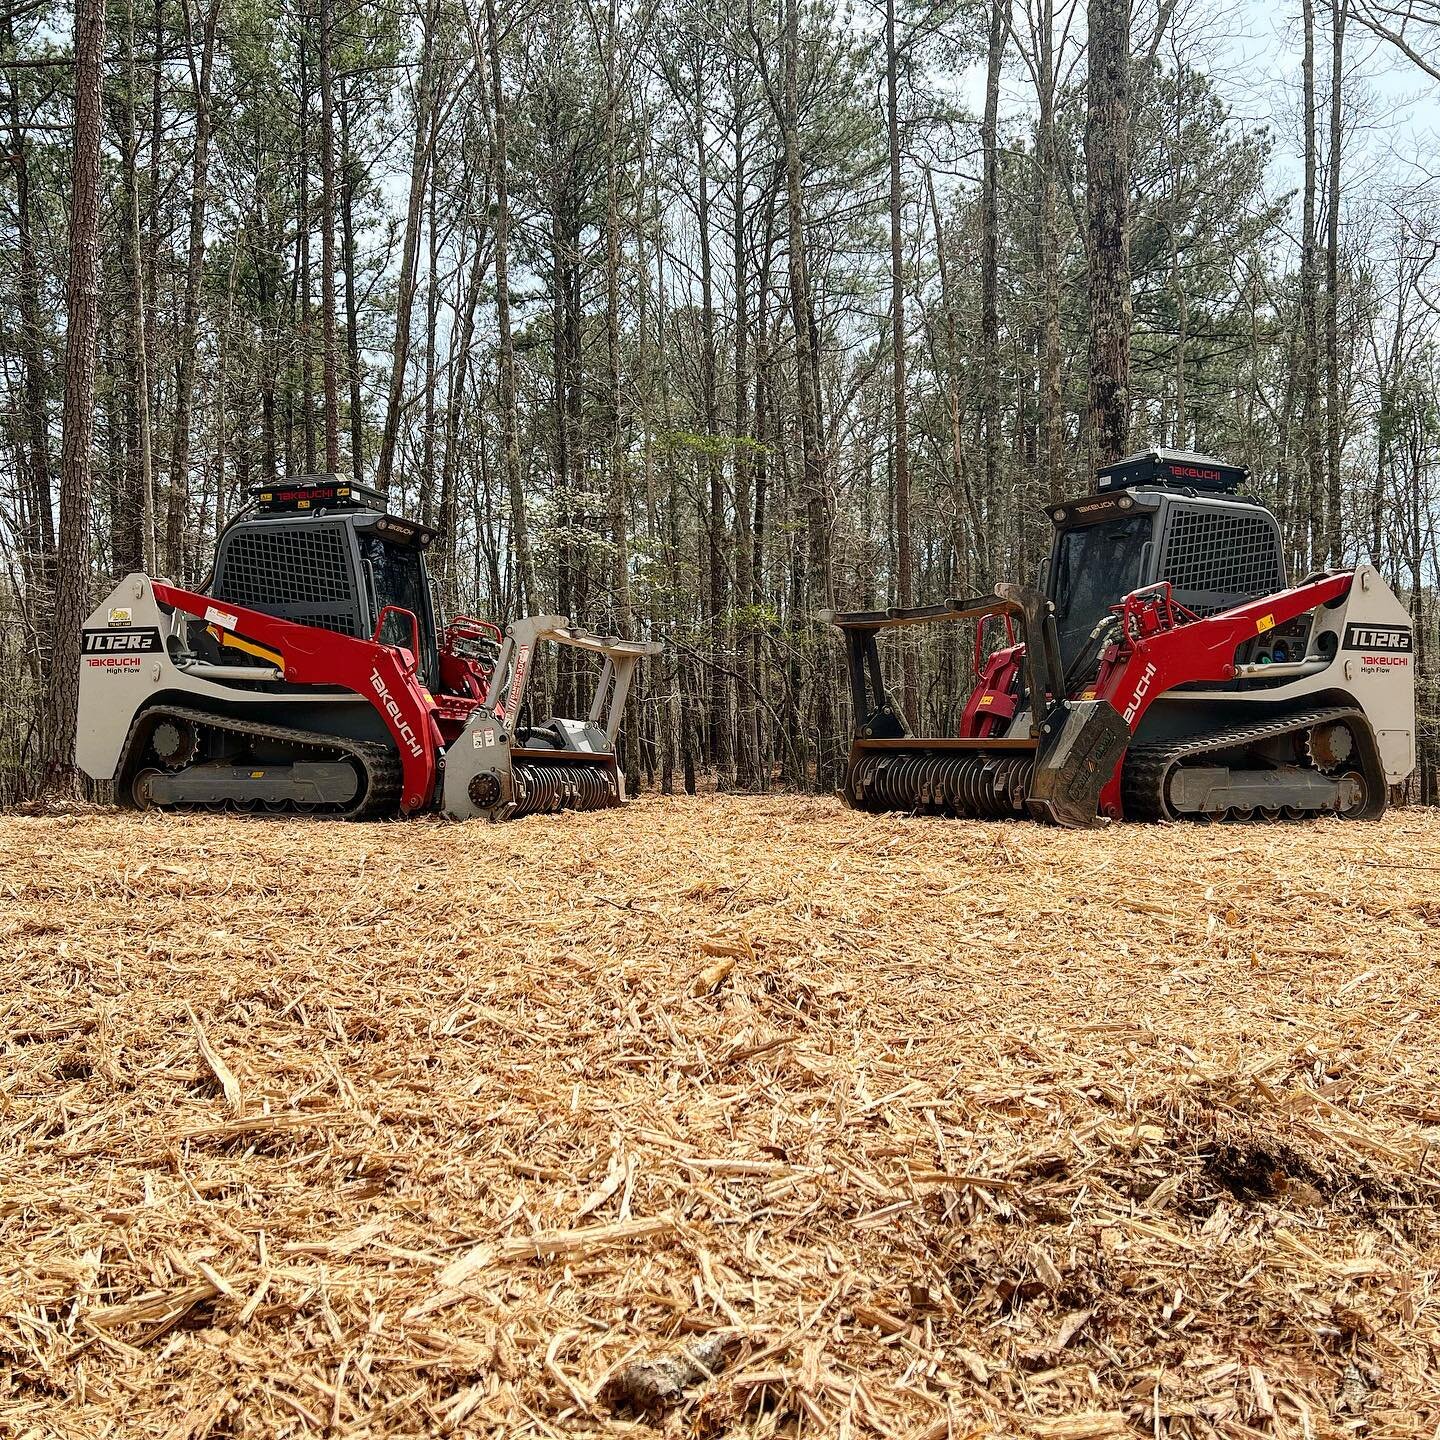 🚨 BIG NEWS 🚨 
We&rsquo;re excited to share that we&rsquo;ve doubled our fleet! Buckeye Land Management now has 2 full-time operators and machines to service your projects. We continue our dedication to providing our customers with quality work, hon